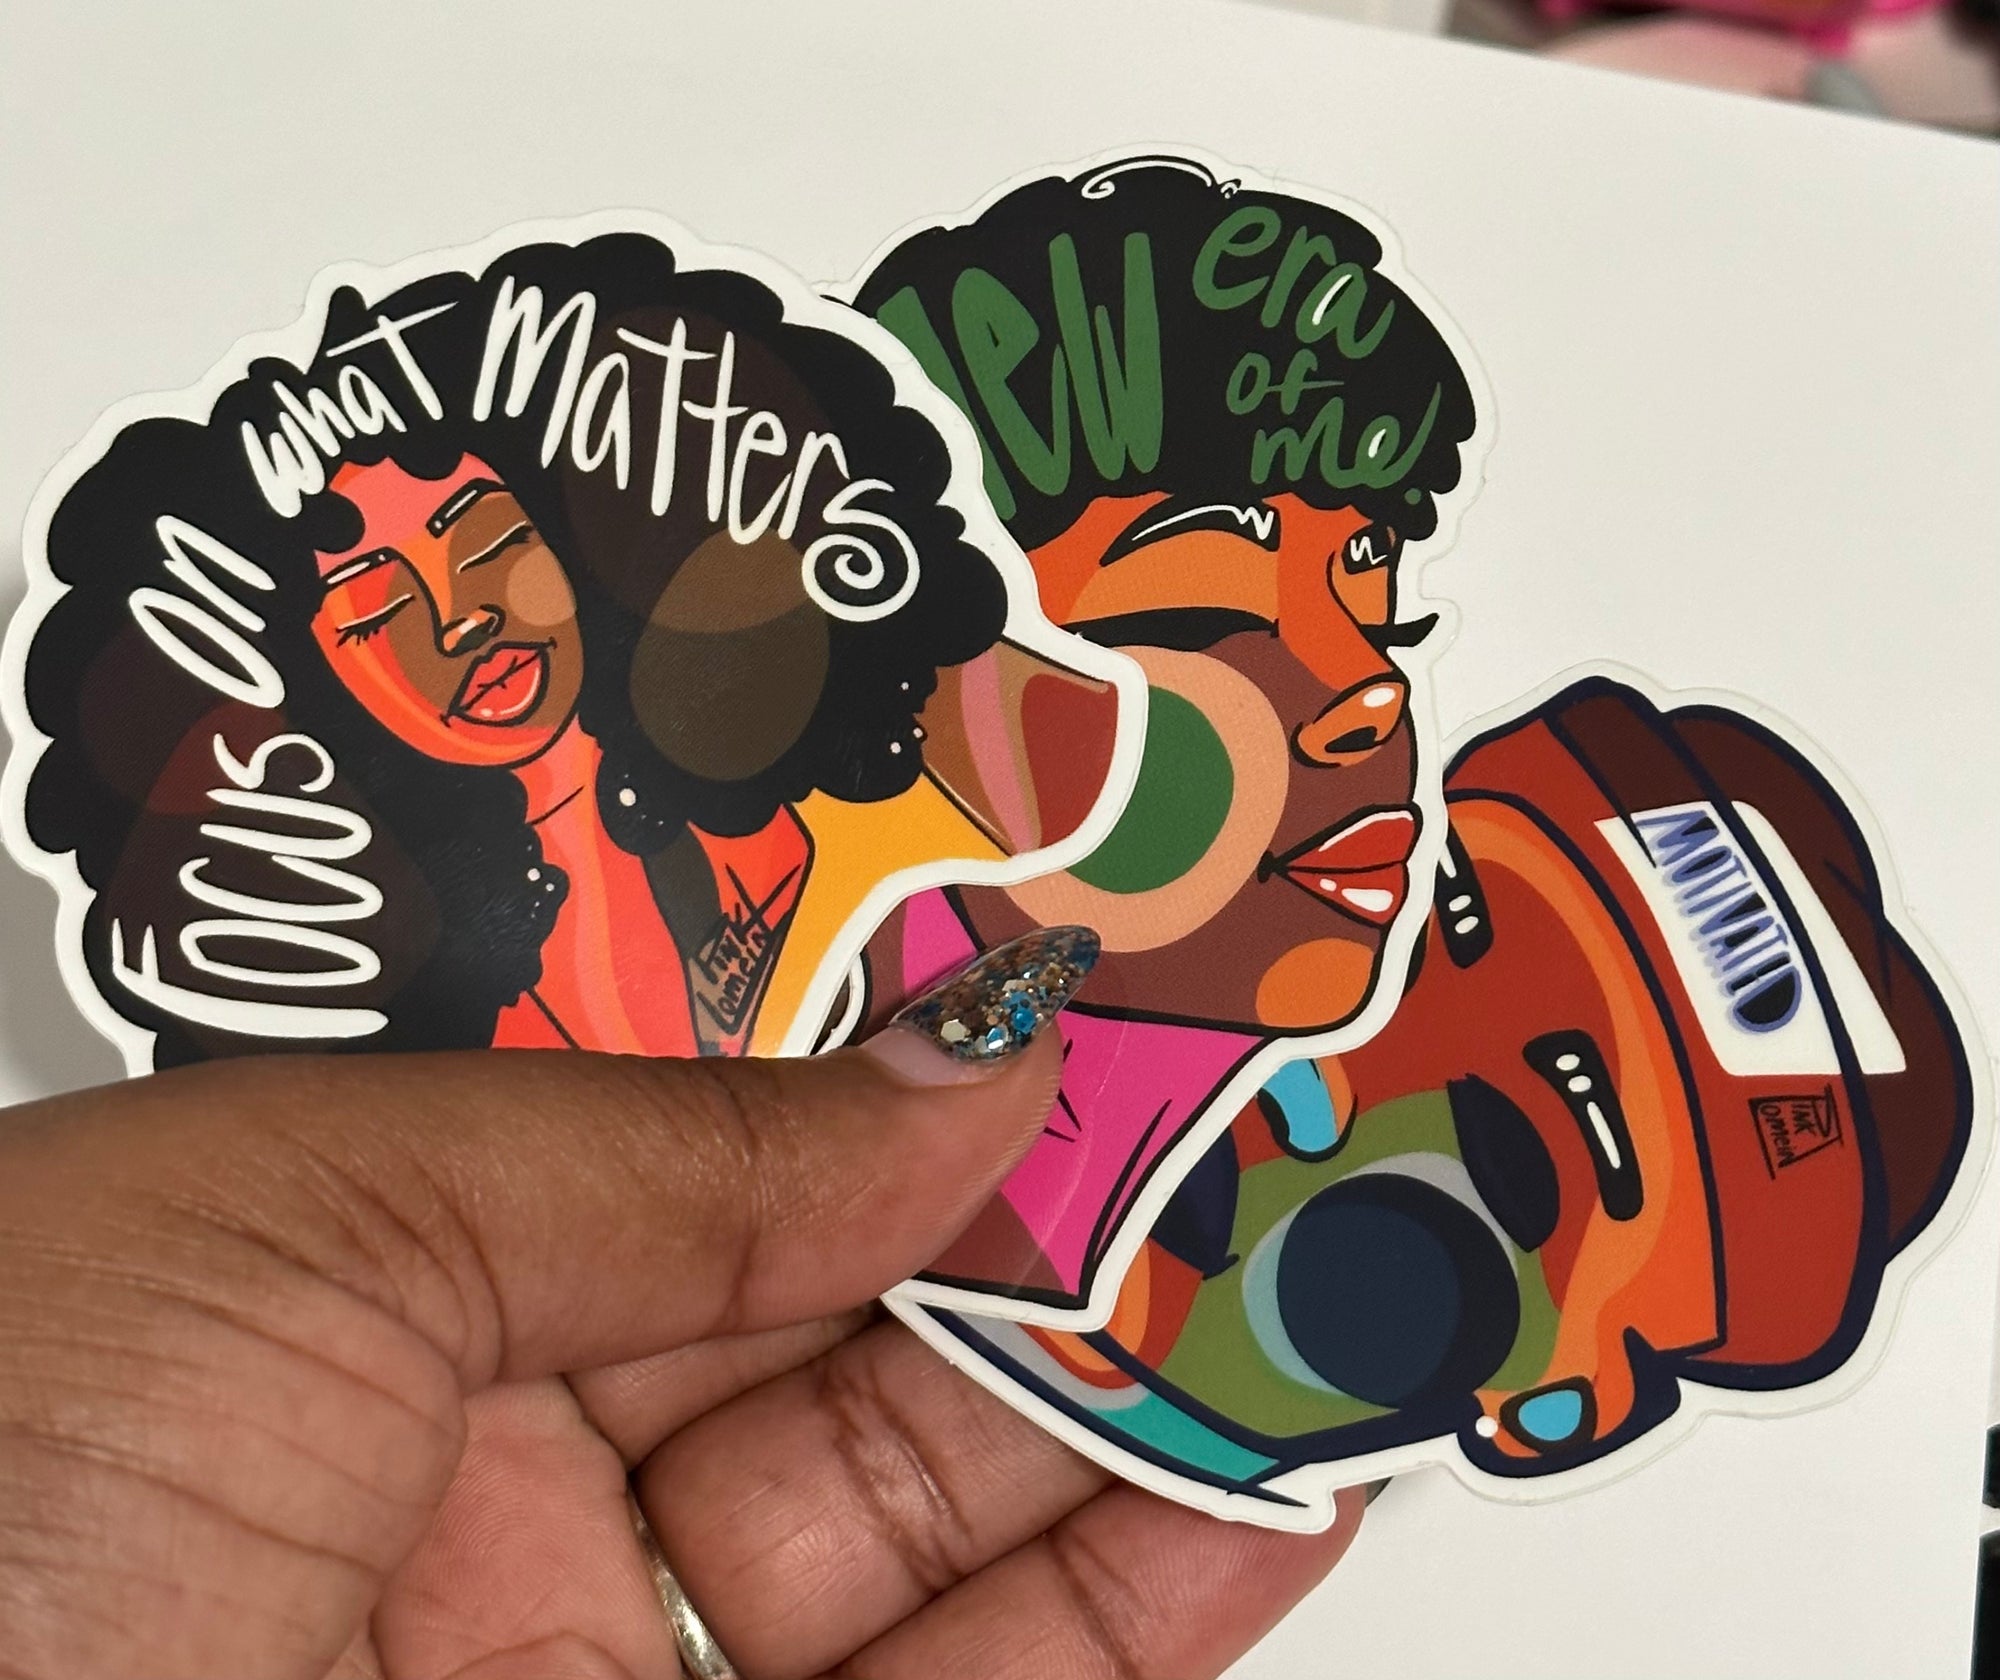 A New Era, Focus, and Motivated Vinyl Sticker Pack